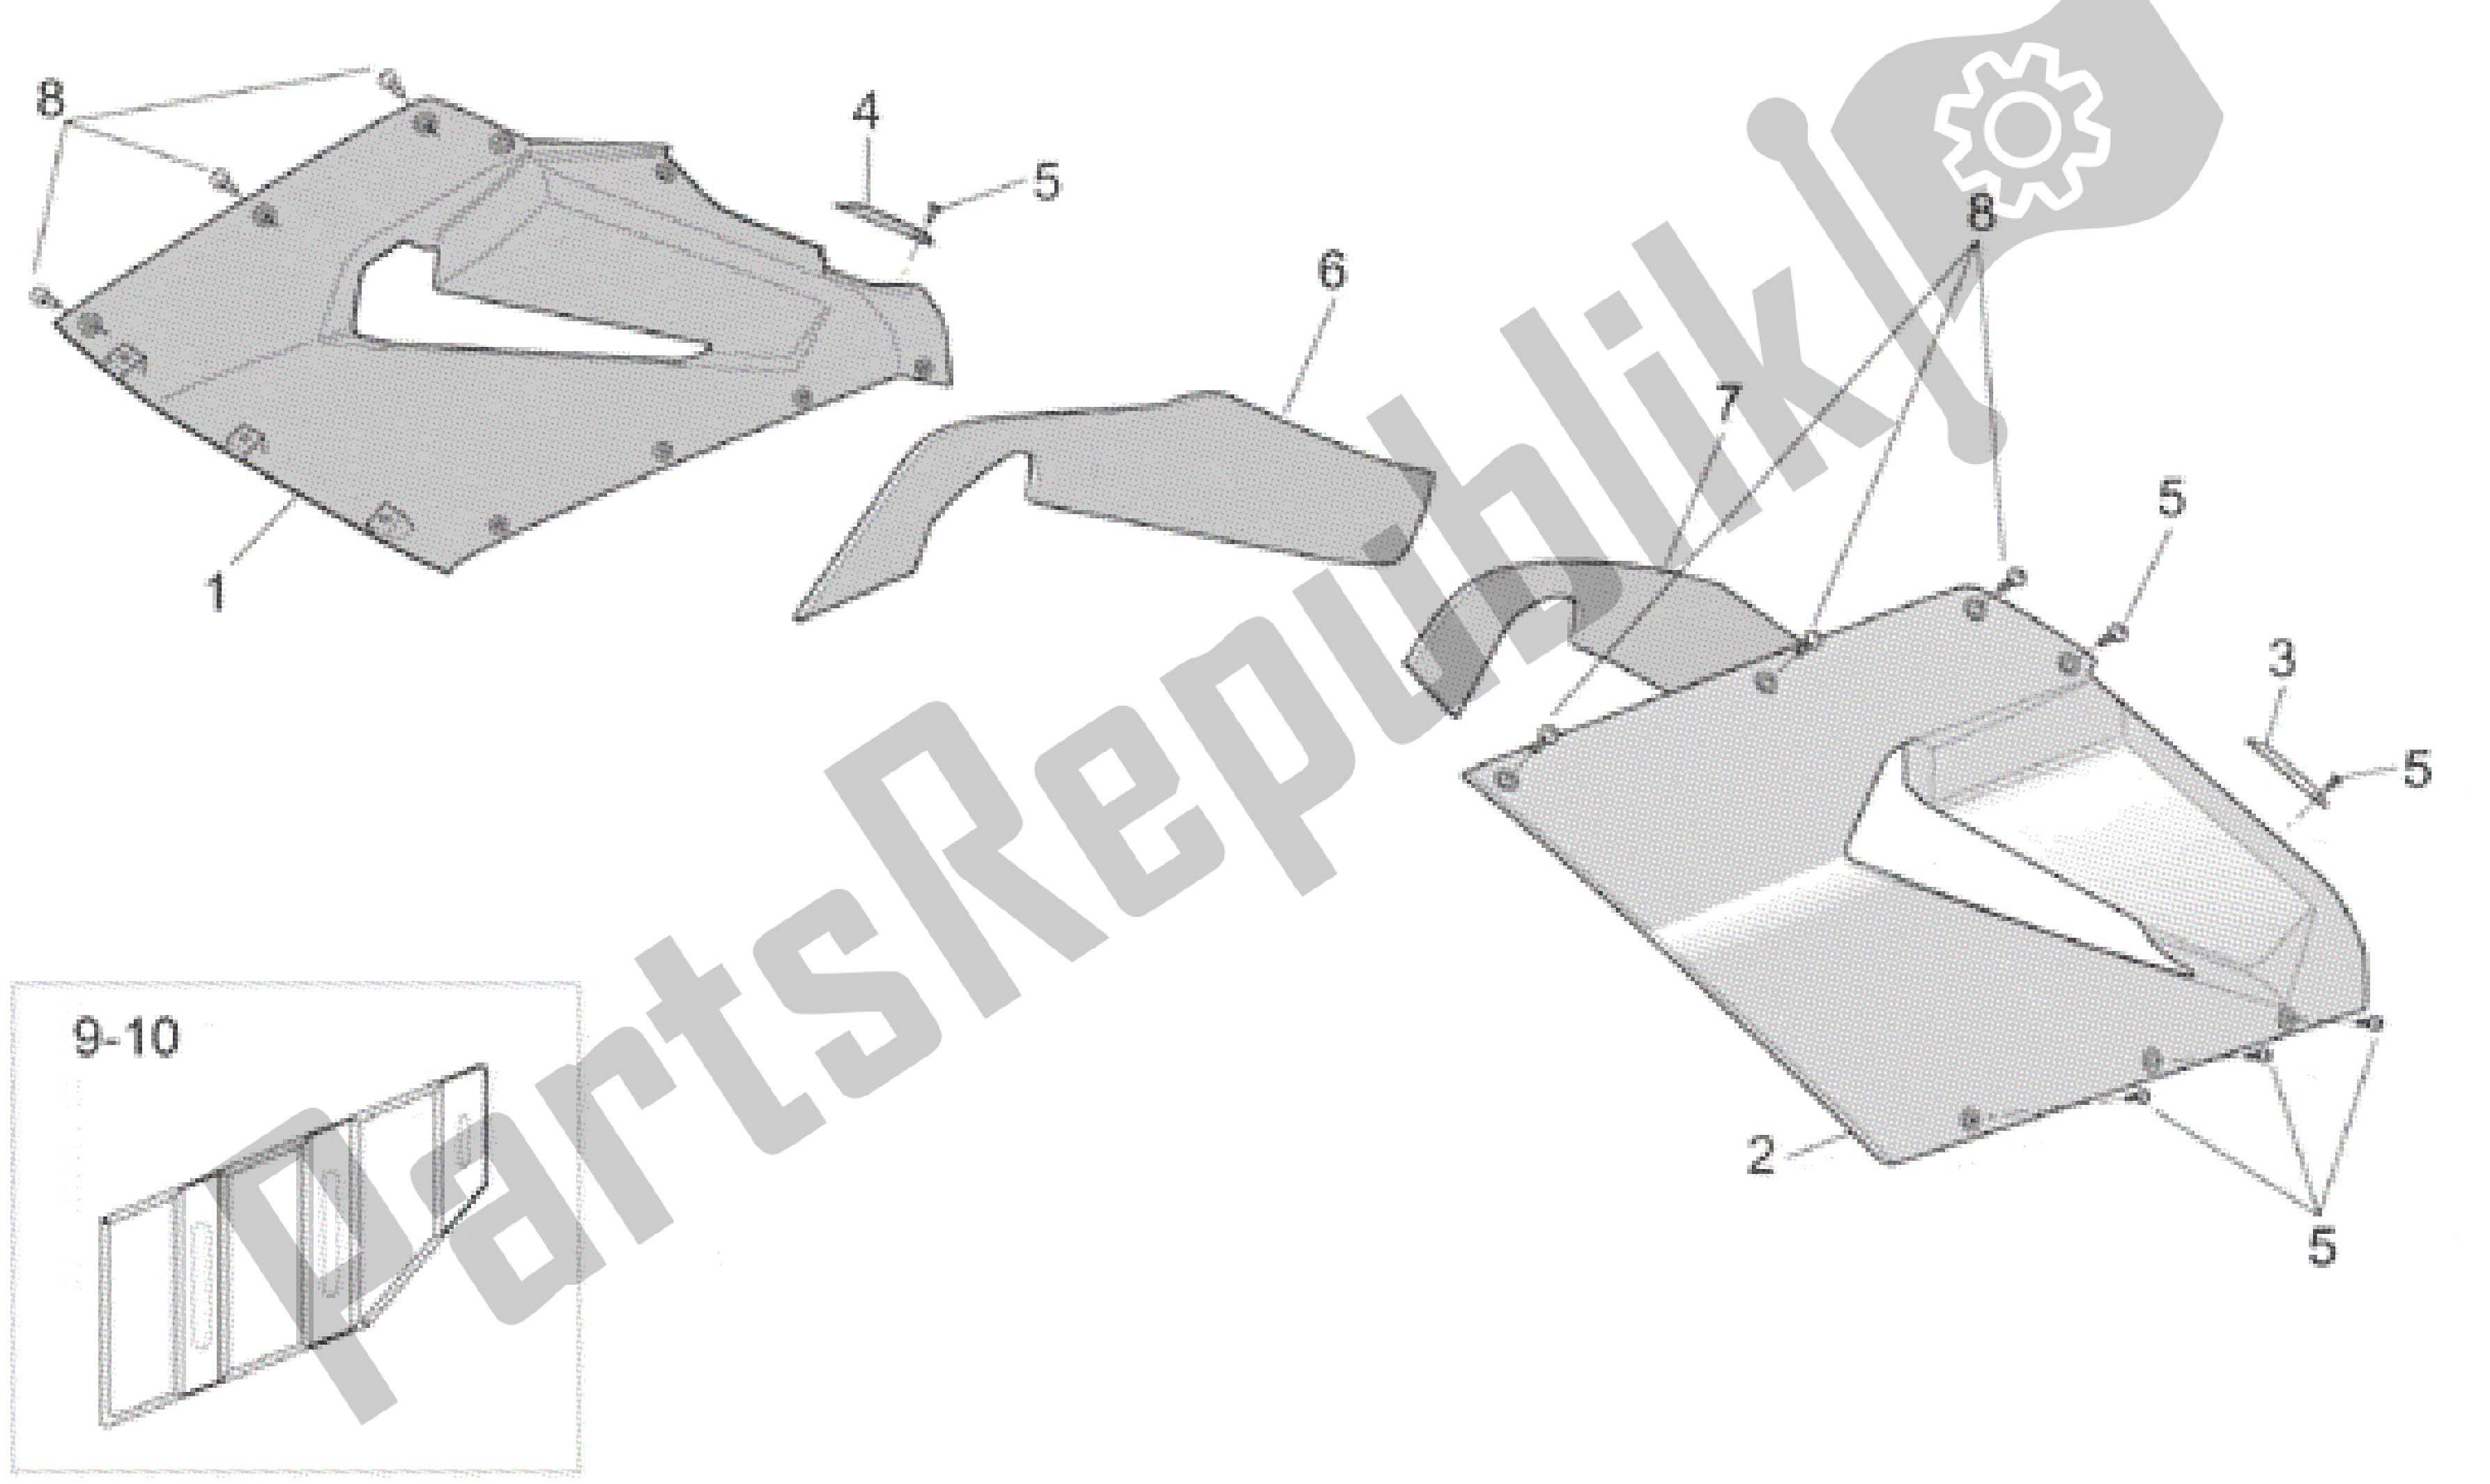 All parts for the Central Body - Upper Fairings of the Aprilia RST 1000 2001